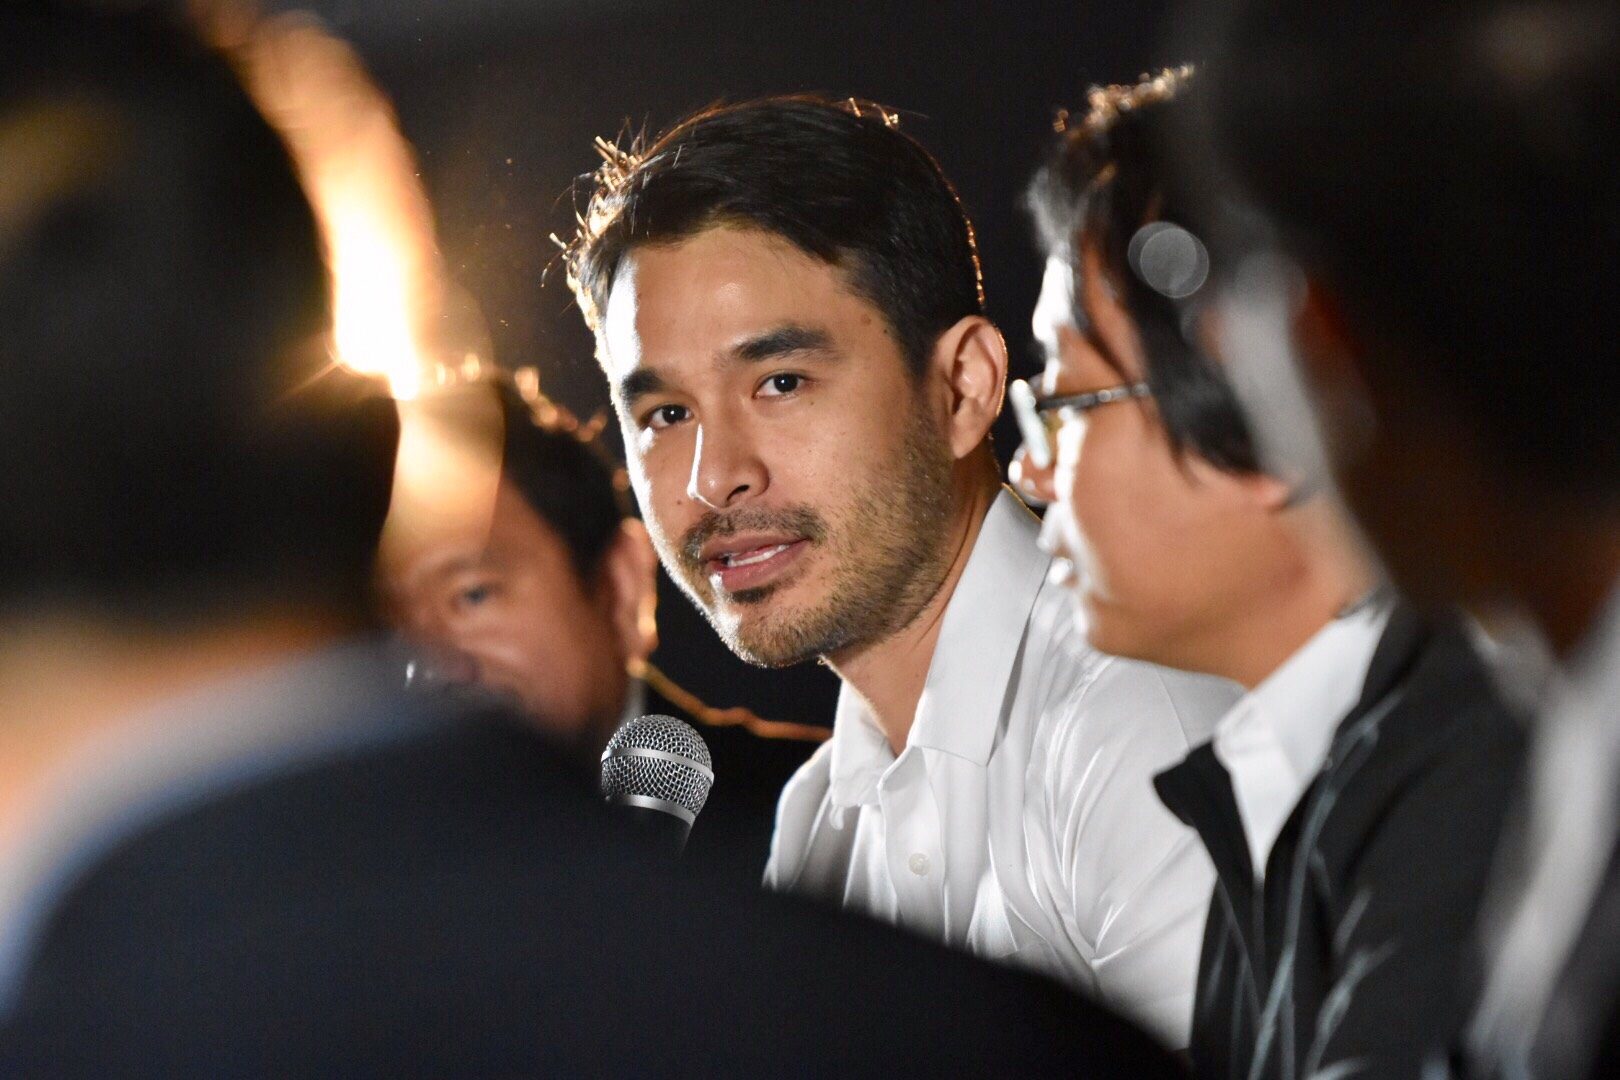 MEDIA'S ROLE. In a panel discussion, broadcast journalist Atom Araullo says that in the fight against climate change, journalists have the responsibility not only to learn how to connect the dots but also to convey the bigger picture  